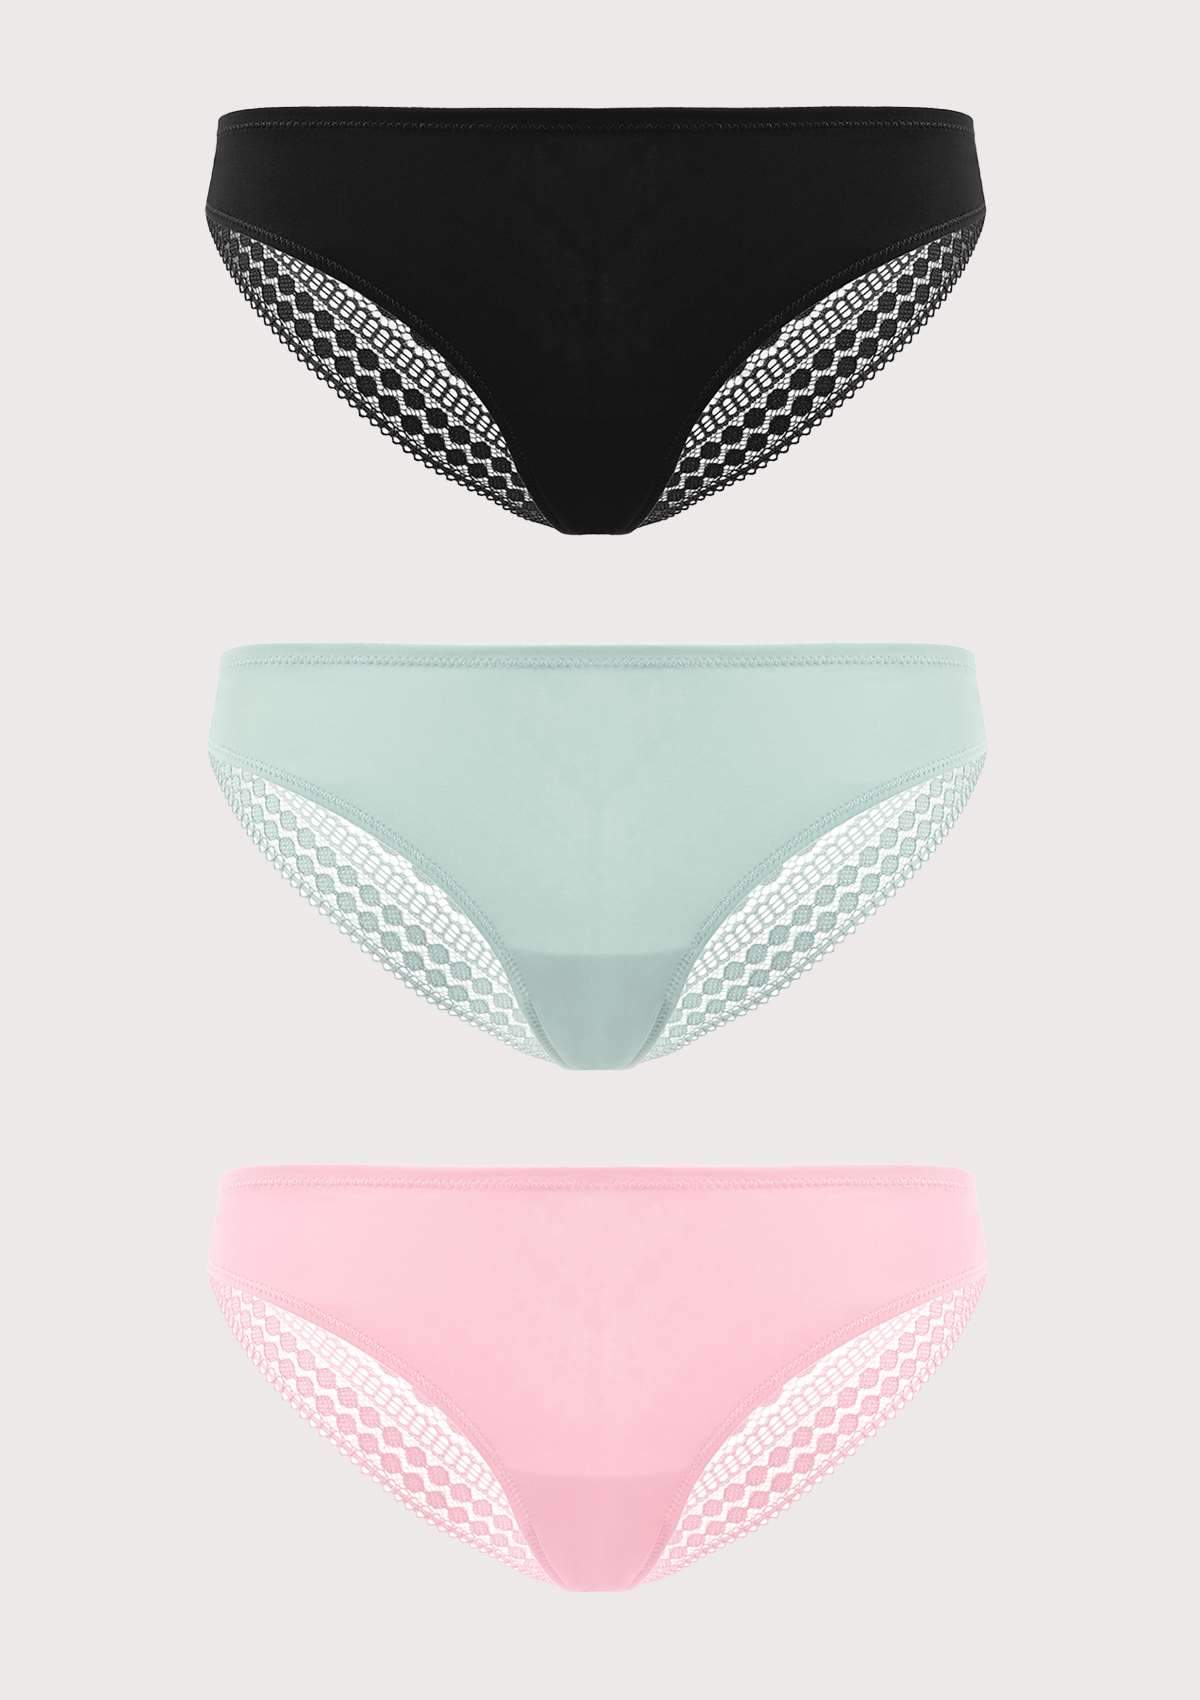 HSIA Polka Dot Super Soft Lace Back Cheeky Panties 3 Pack - L / Black+Rose Cloud+Brittany Blue